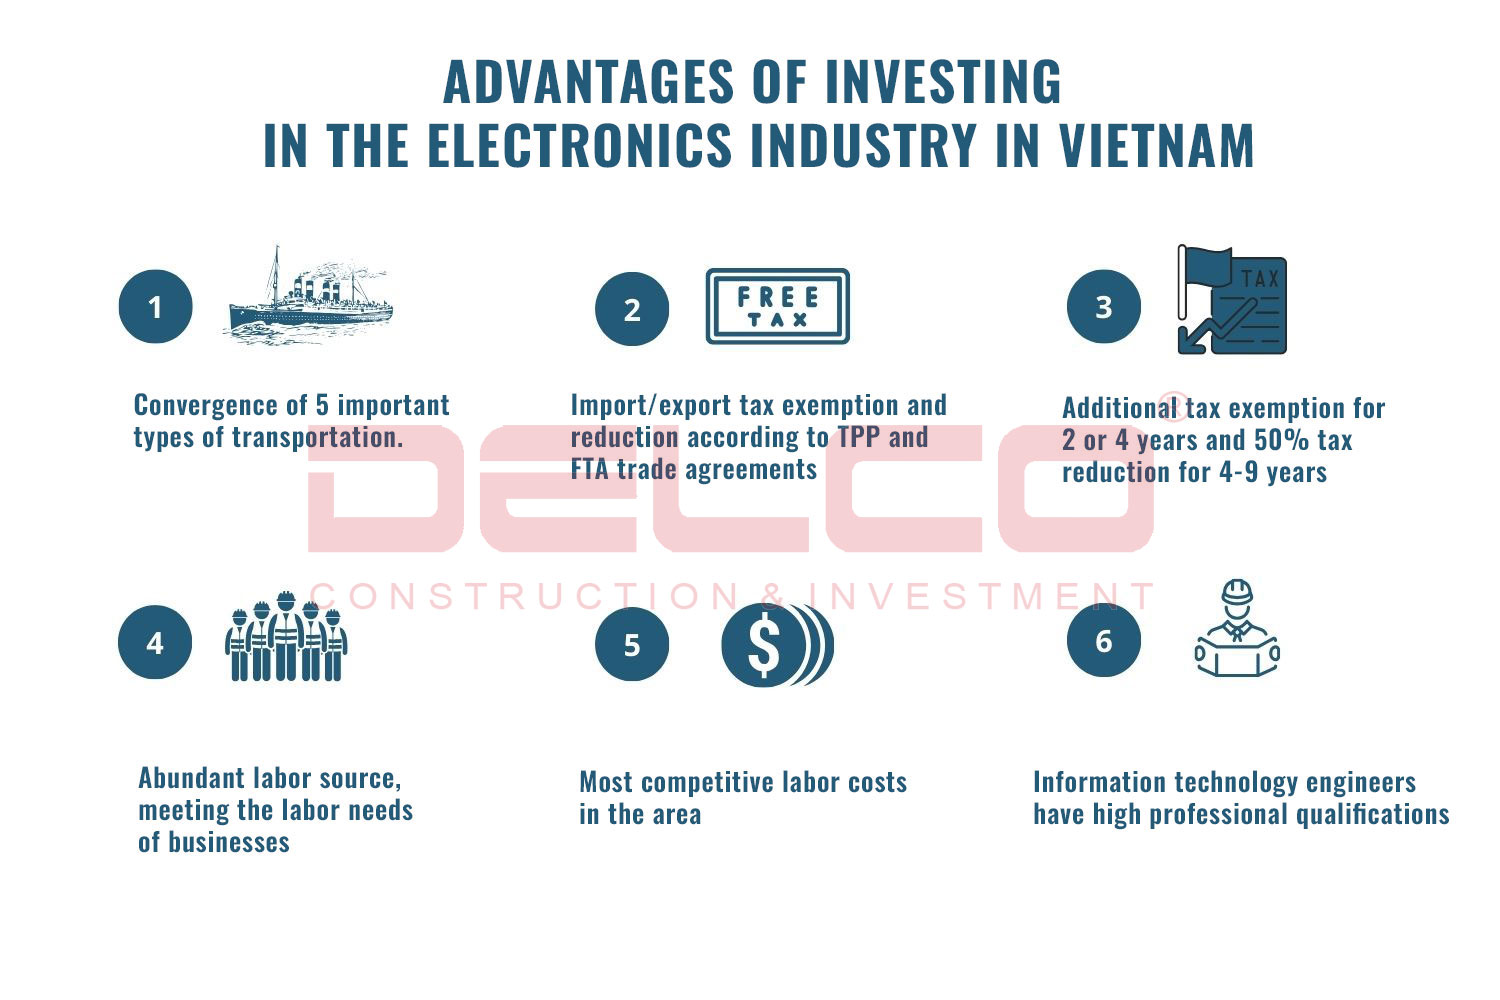 Advantages of investing in Vietnam